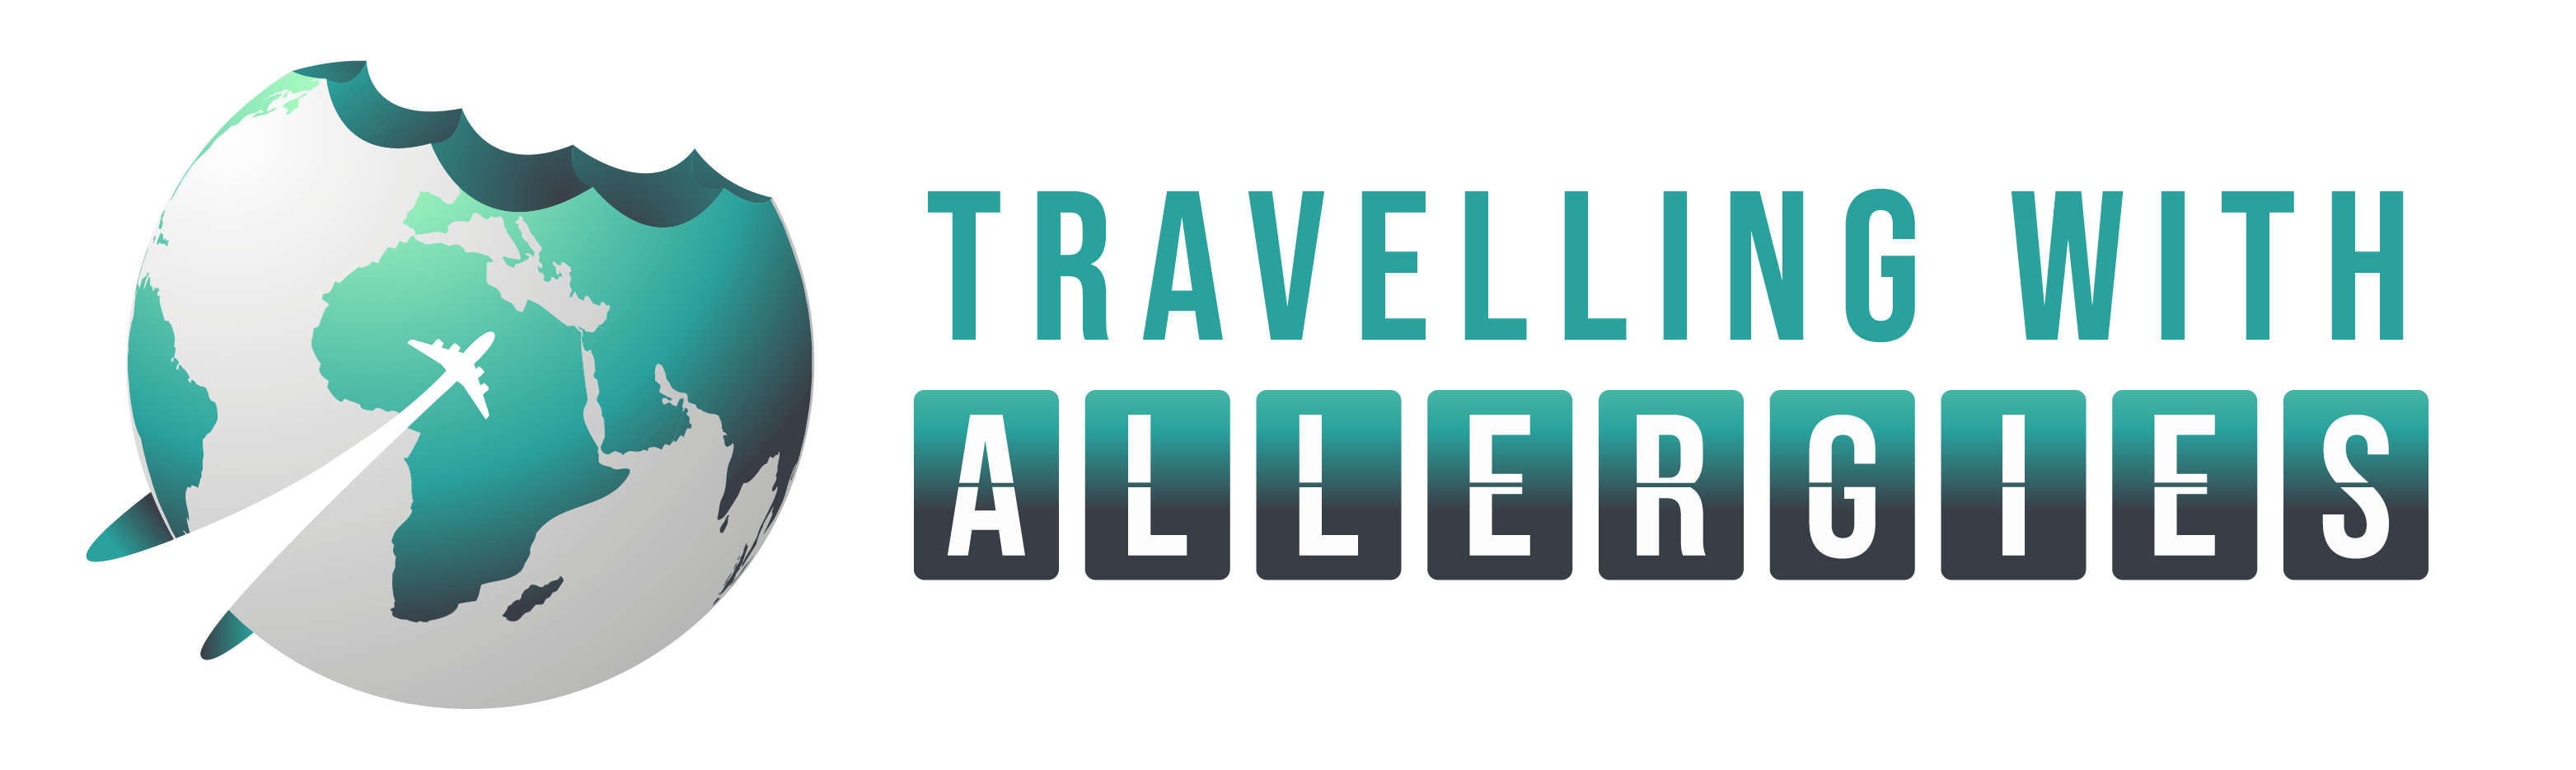 Travelling with Allergies logo